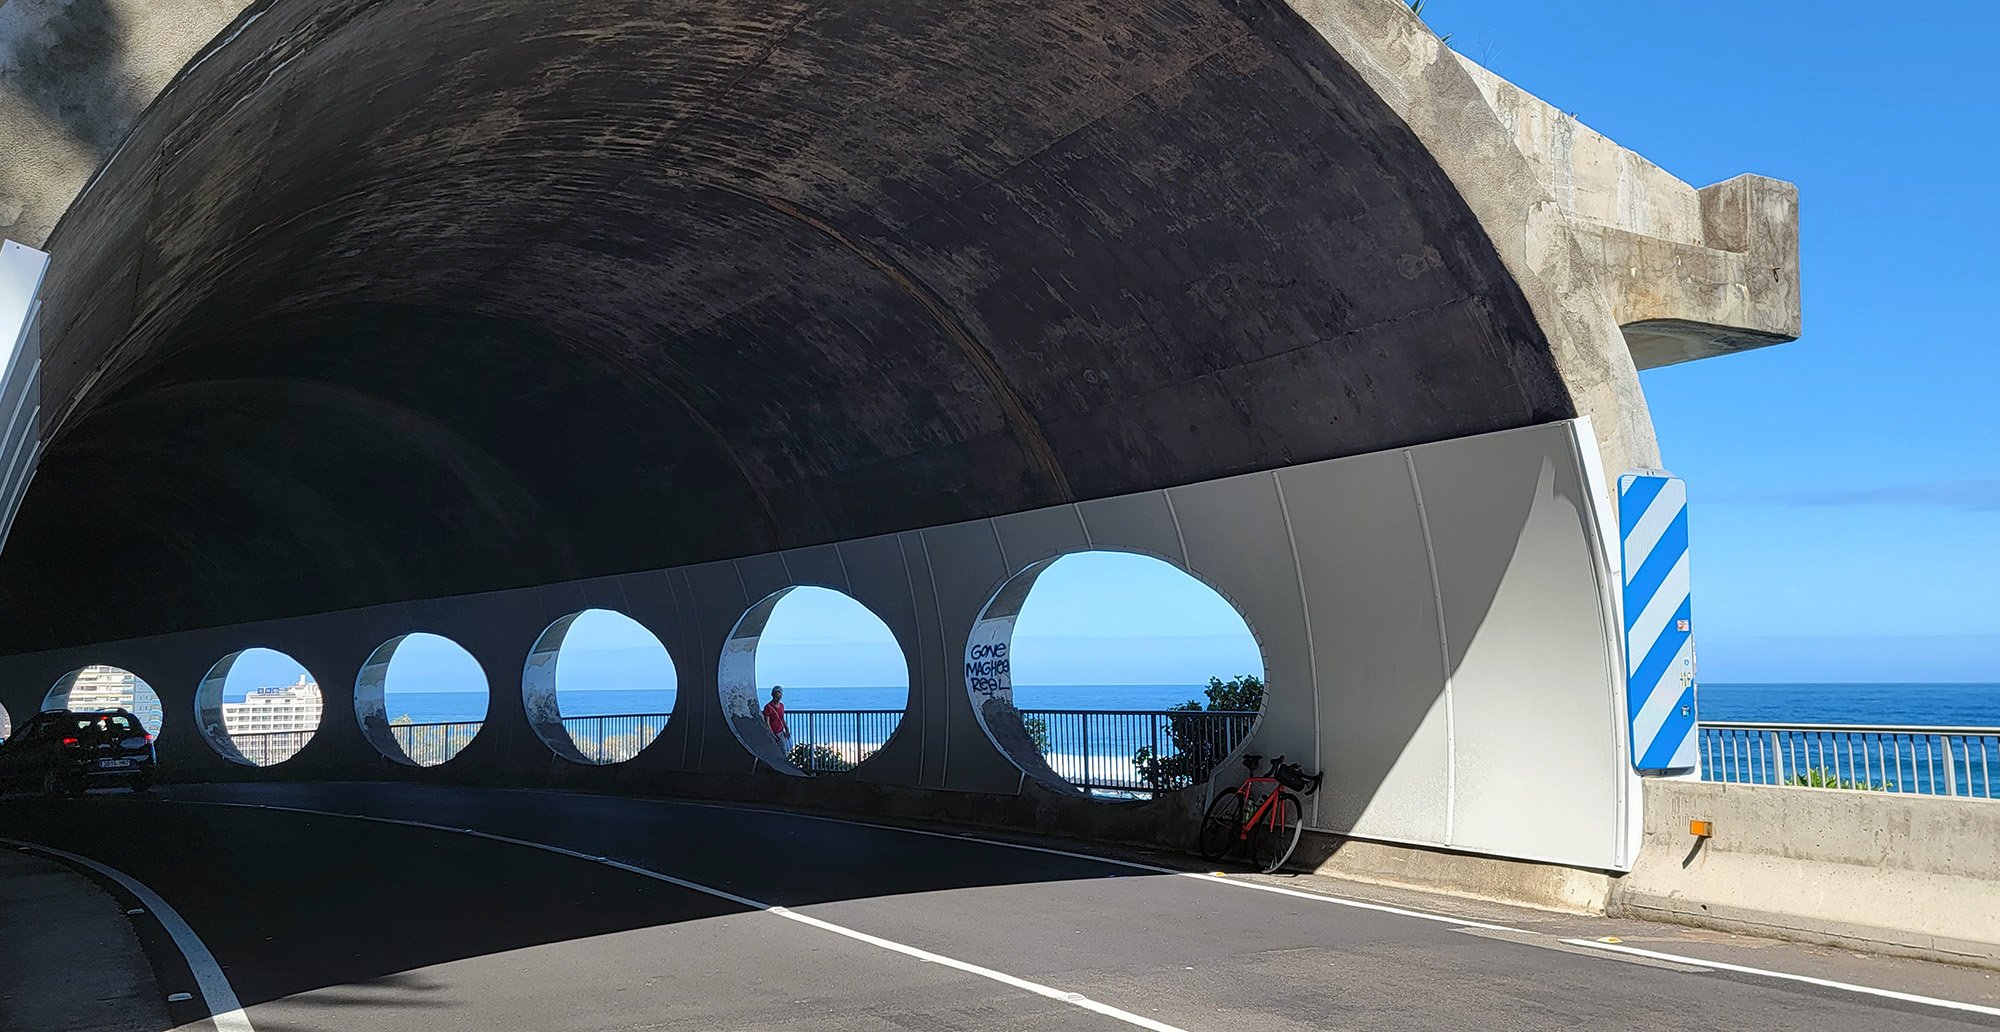 They have these cool half tunnels along the northern roads which let you see the ocean as you drive.